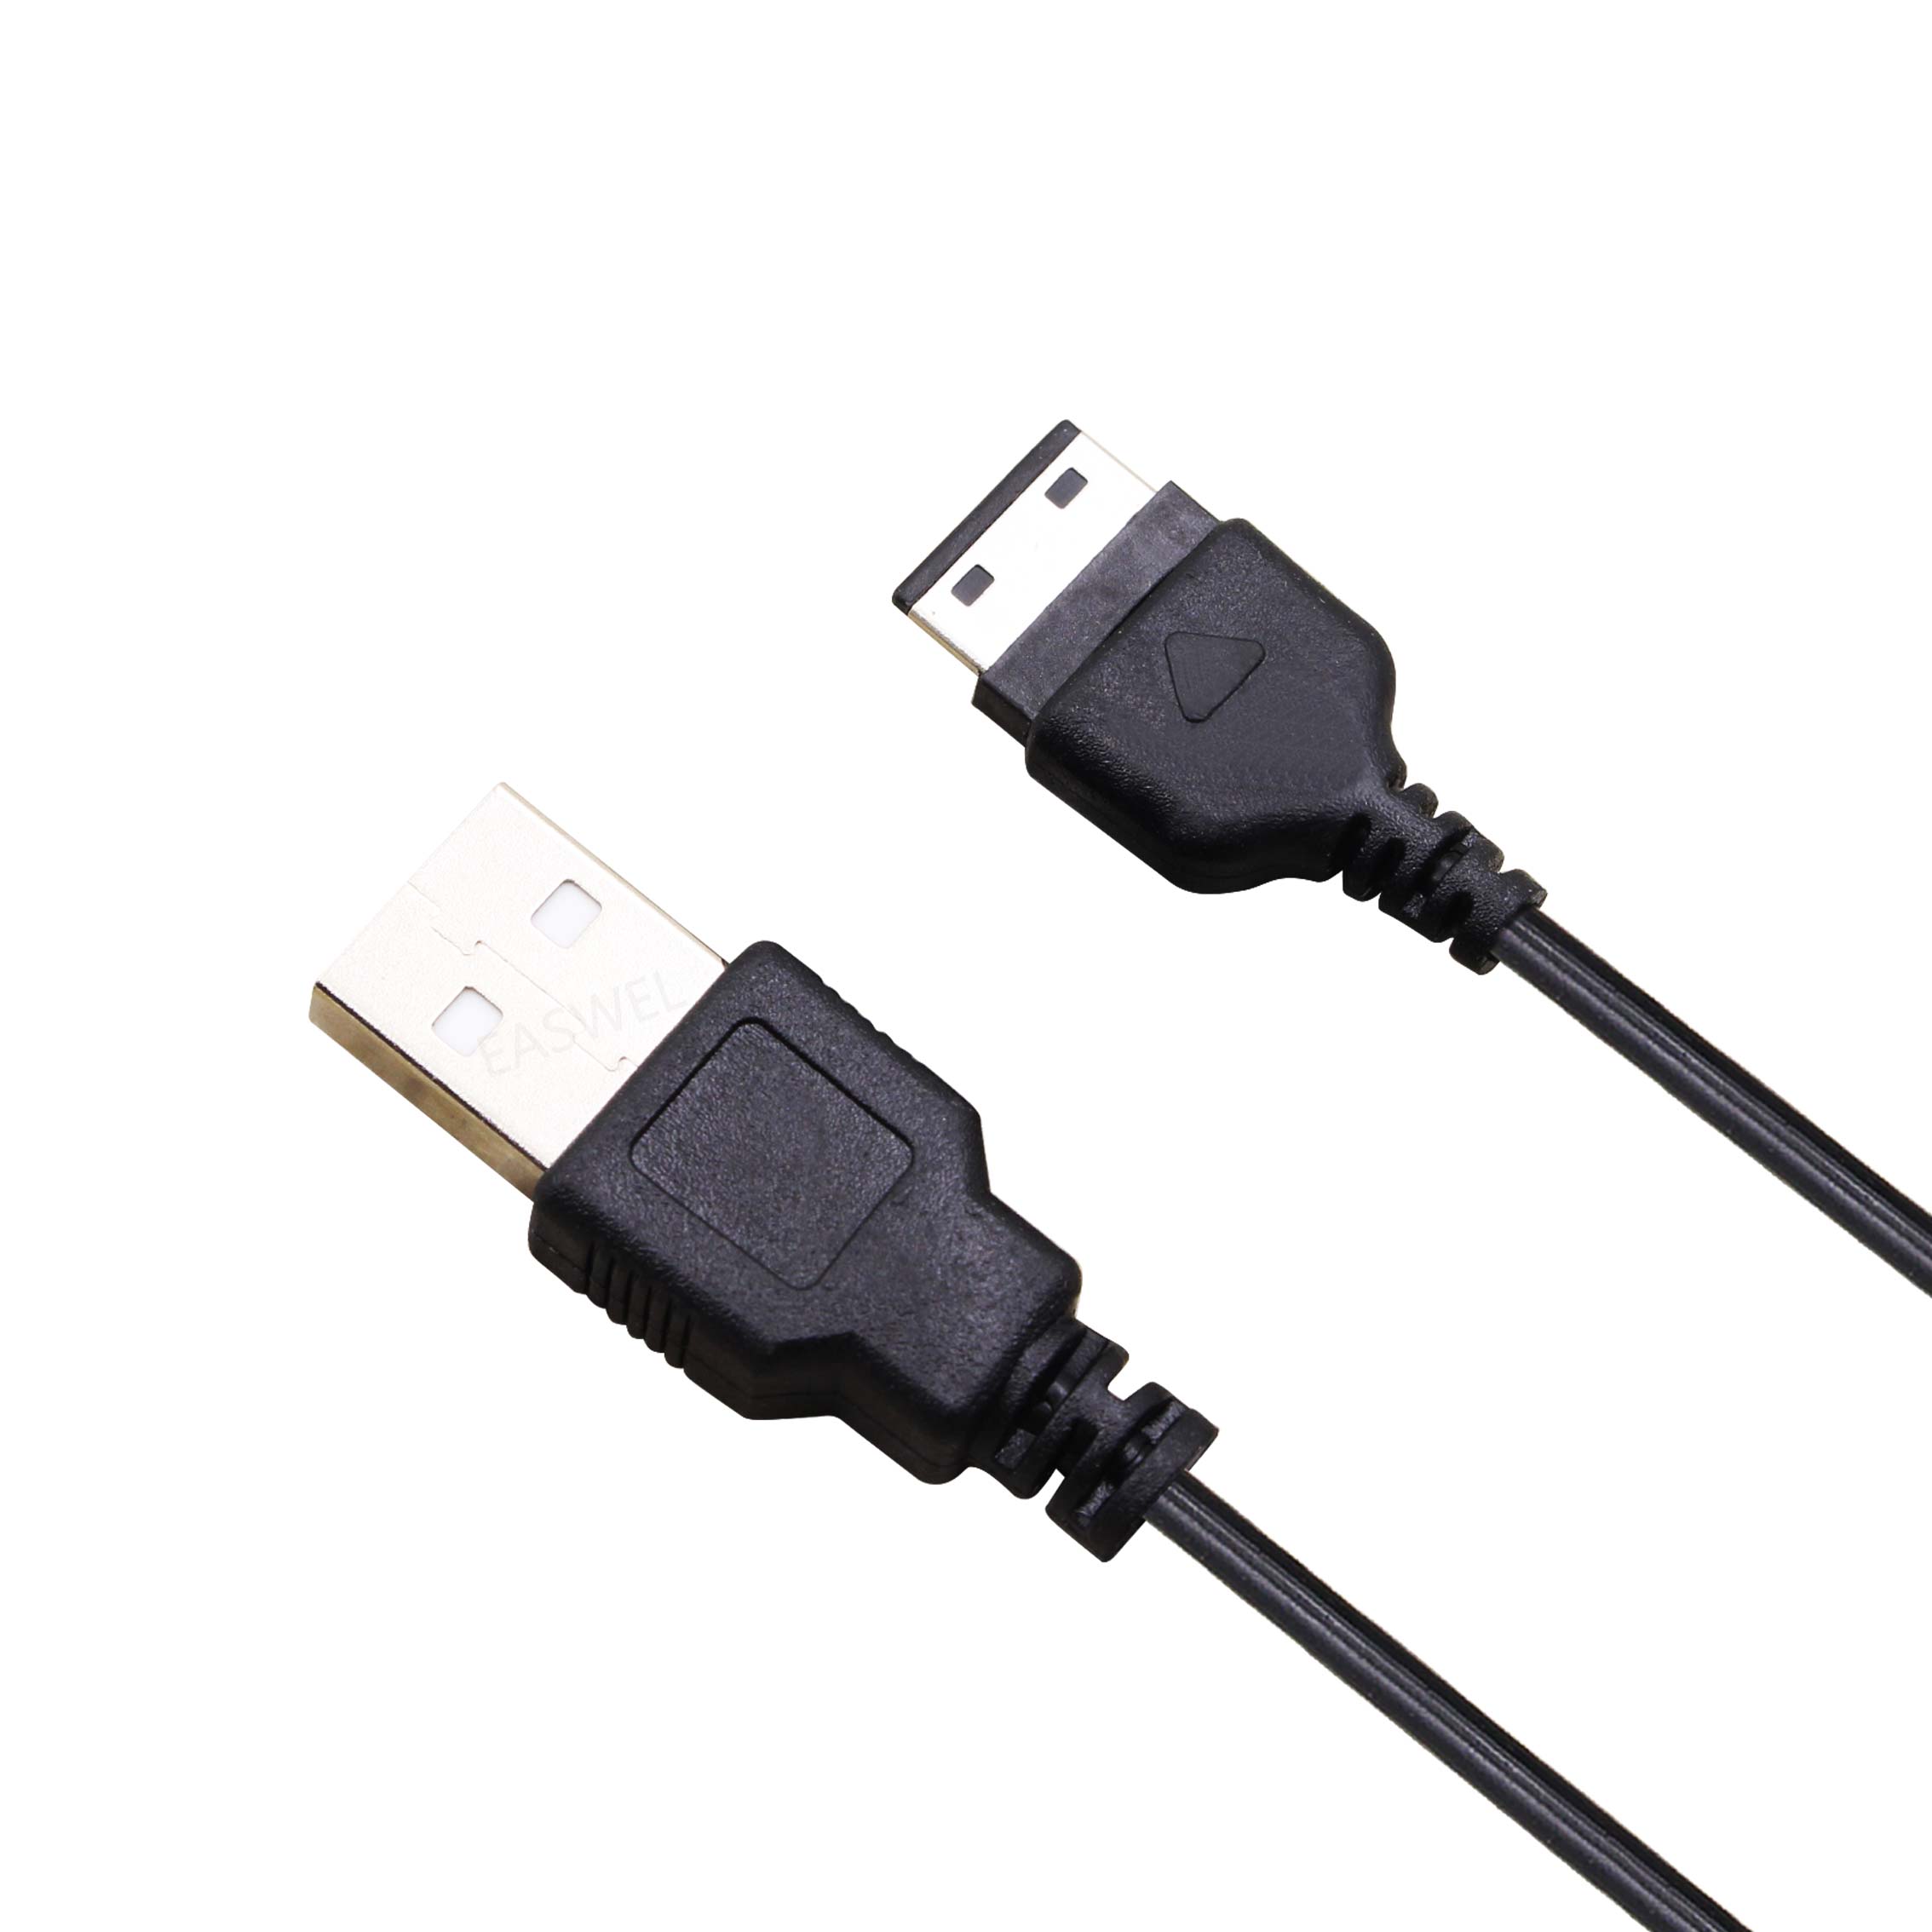 Usb Charger Data Cable Koord Voor Samsung Gt-e2510 Gt-e2550 Gt-e3010 Sgh-e420